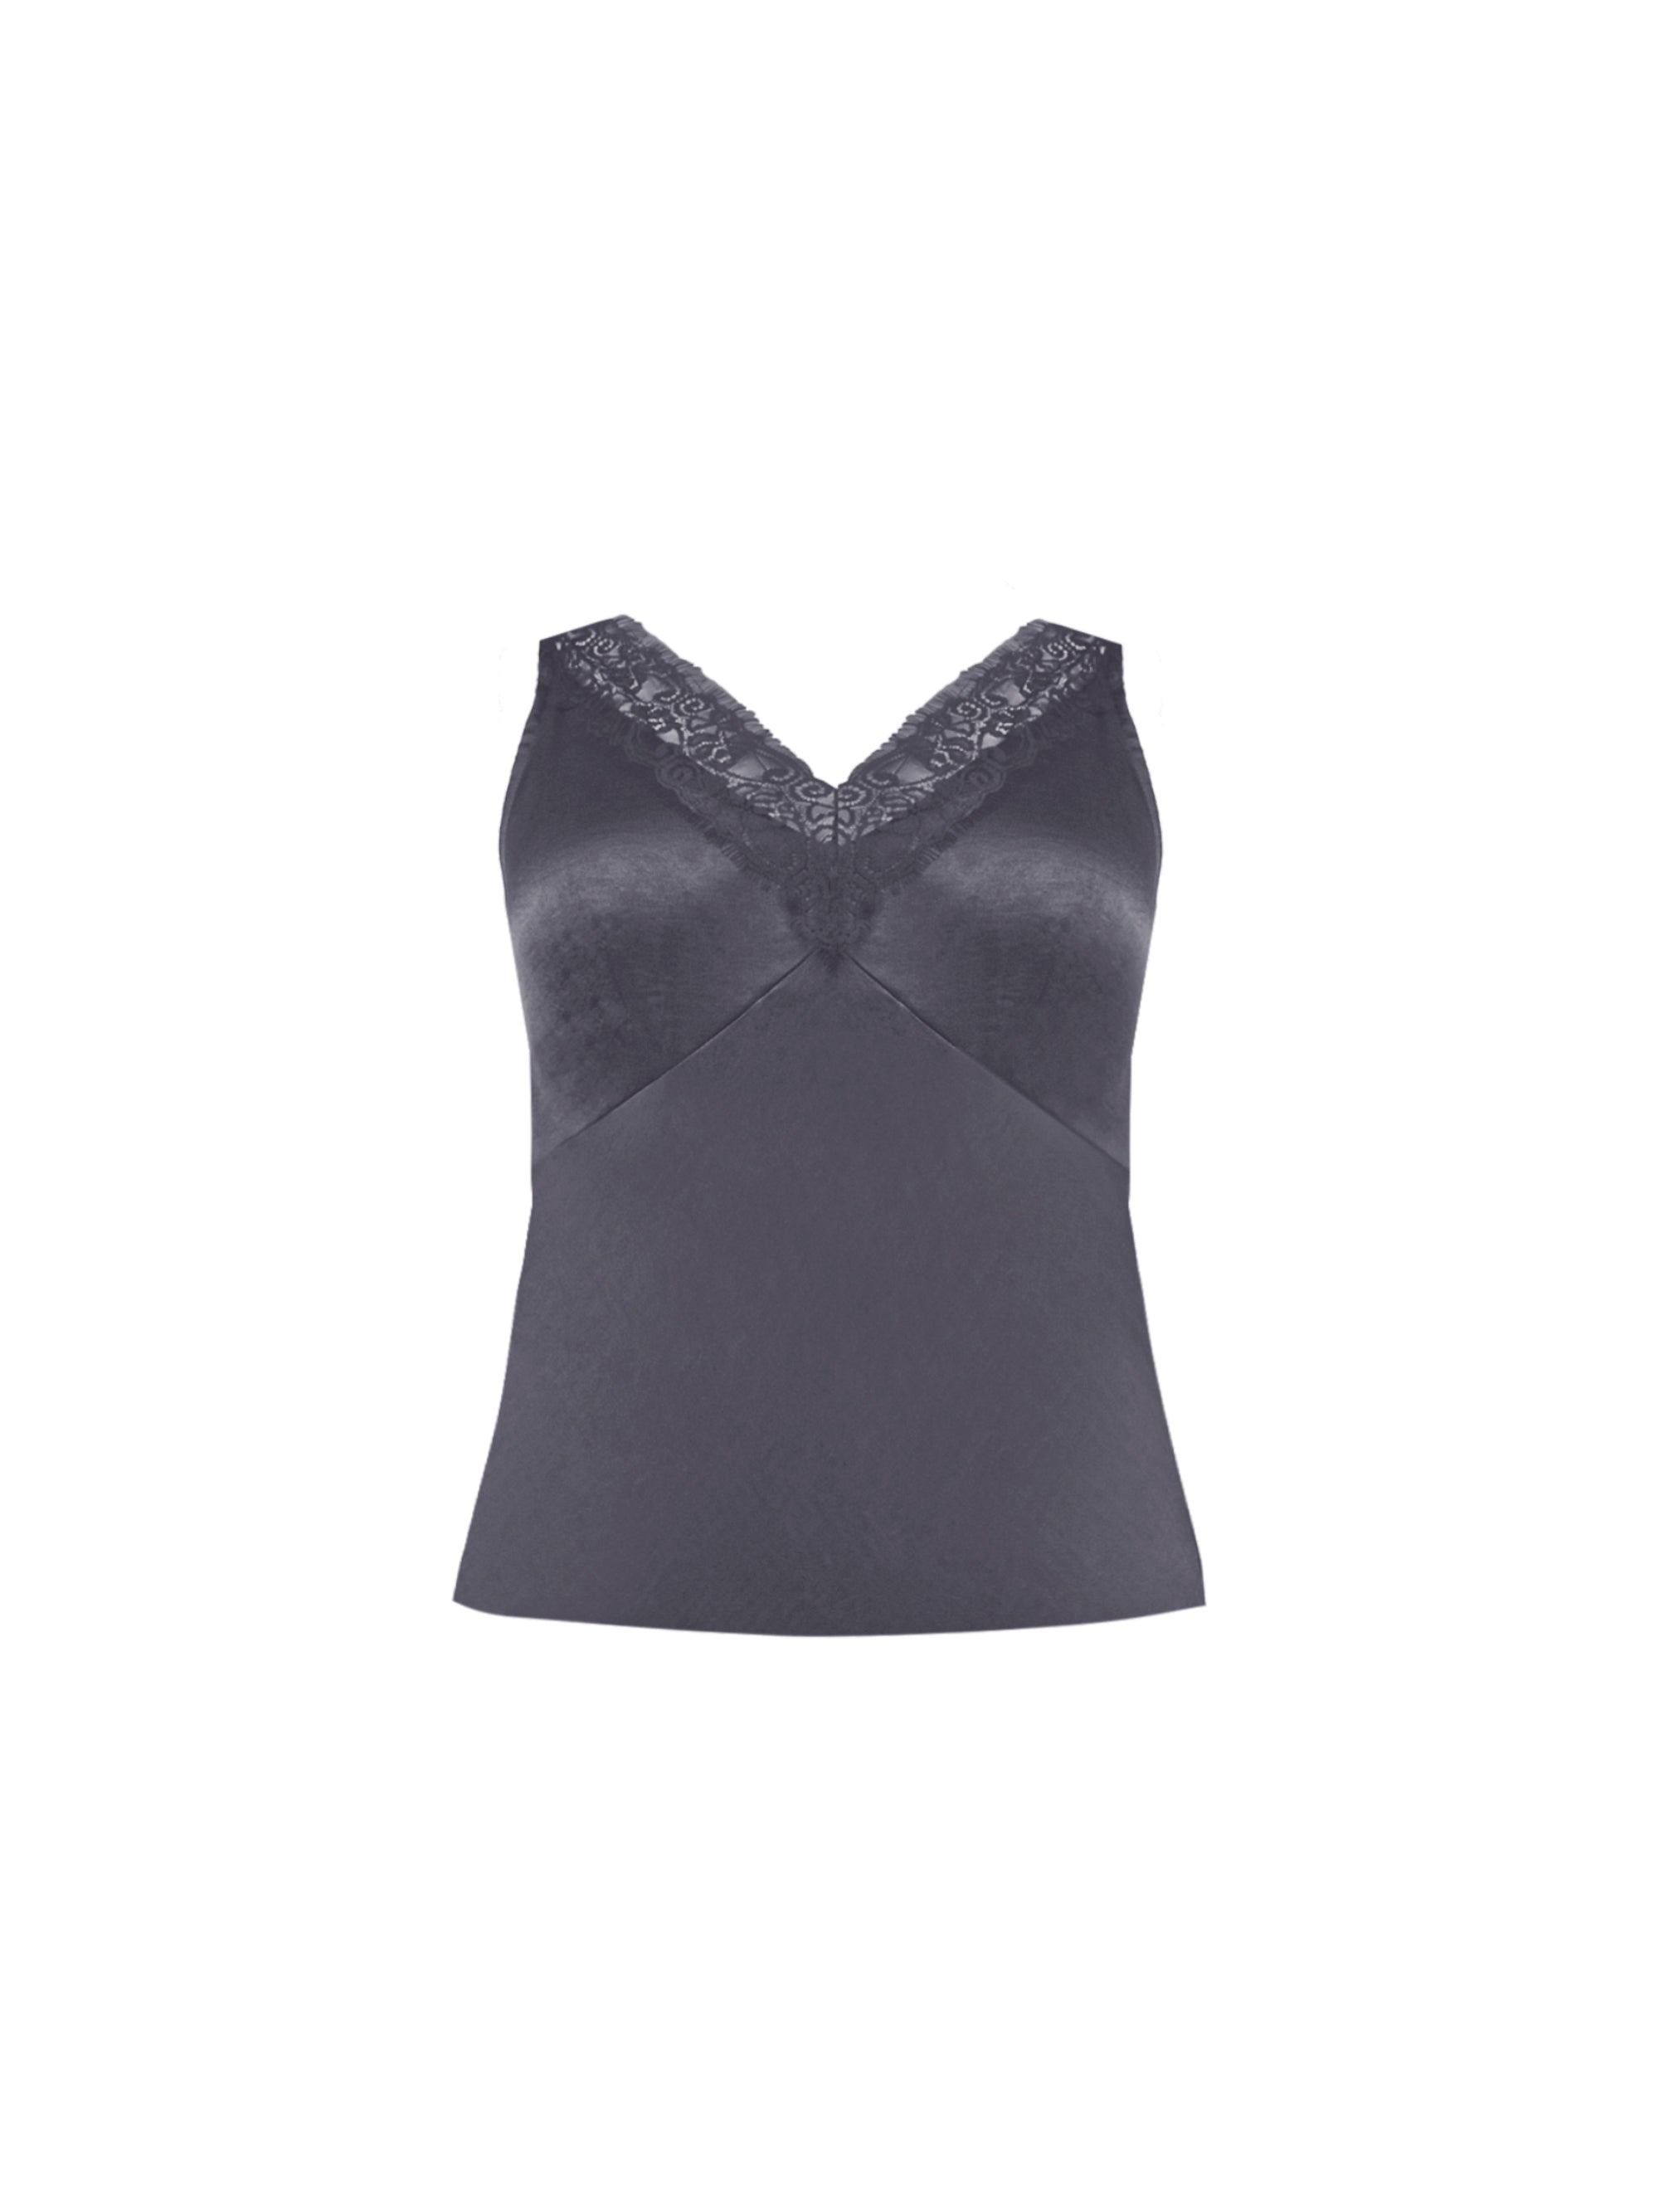 Charcoal Satin Lace Cami